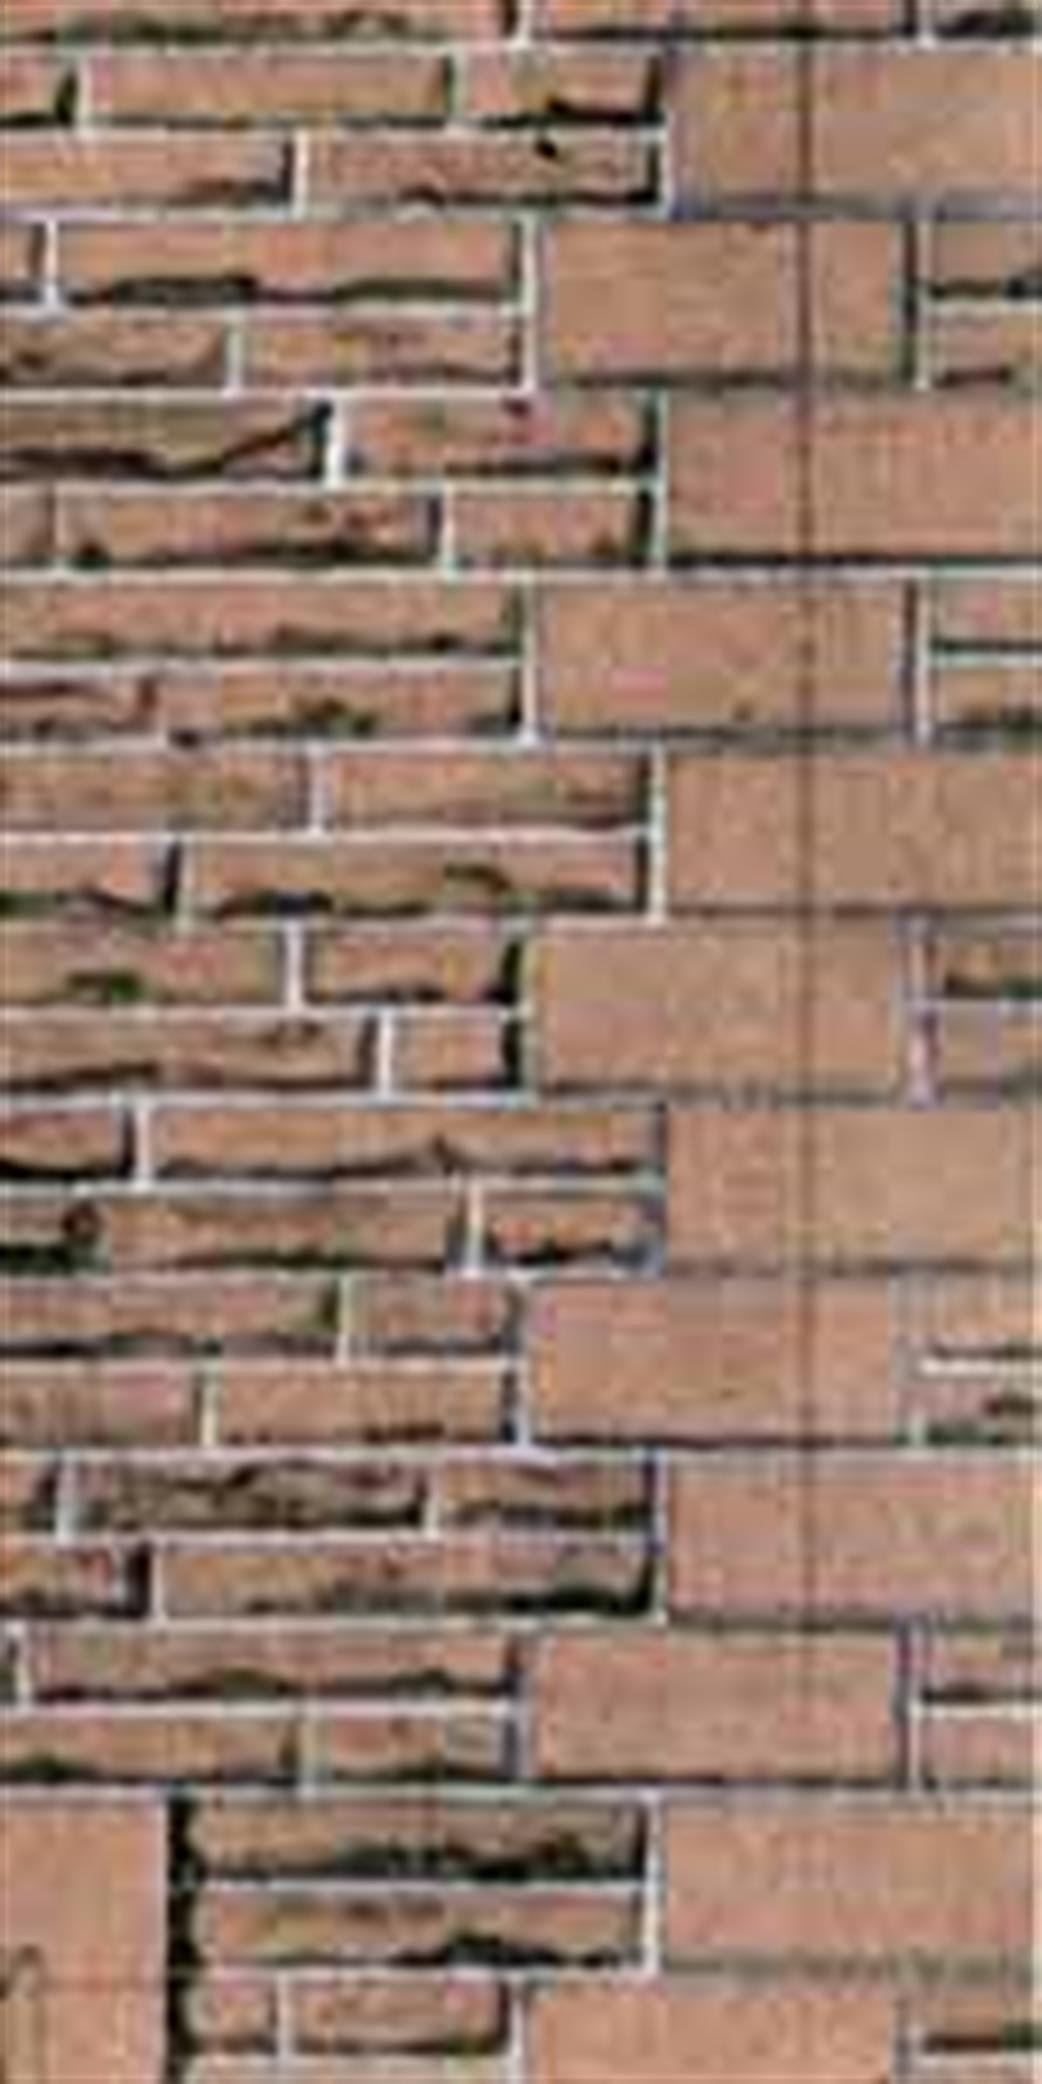 Superquick OO D11 Red Sandstone Courses Walling Pack of 6 Sheets